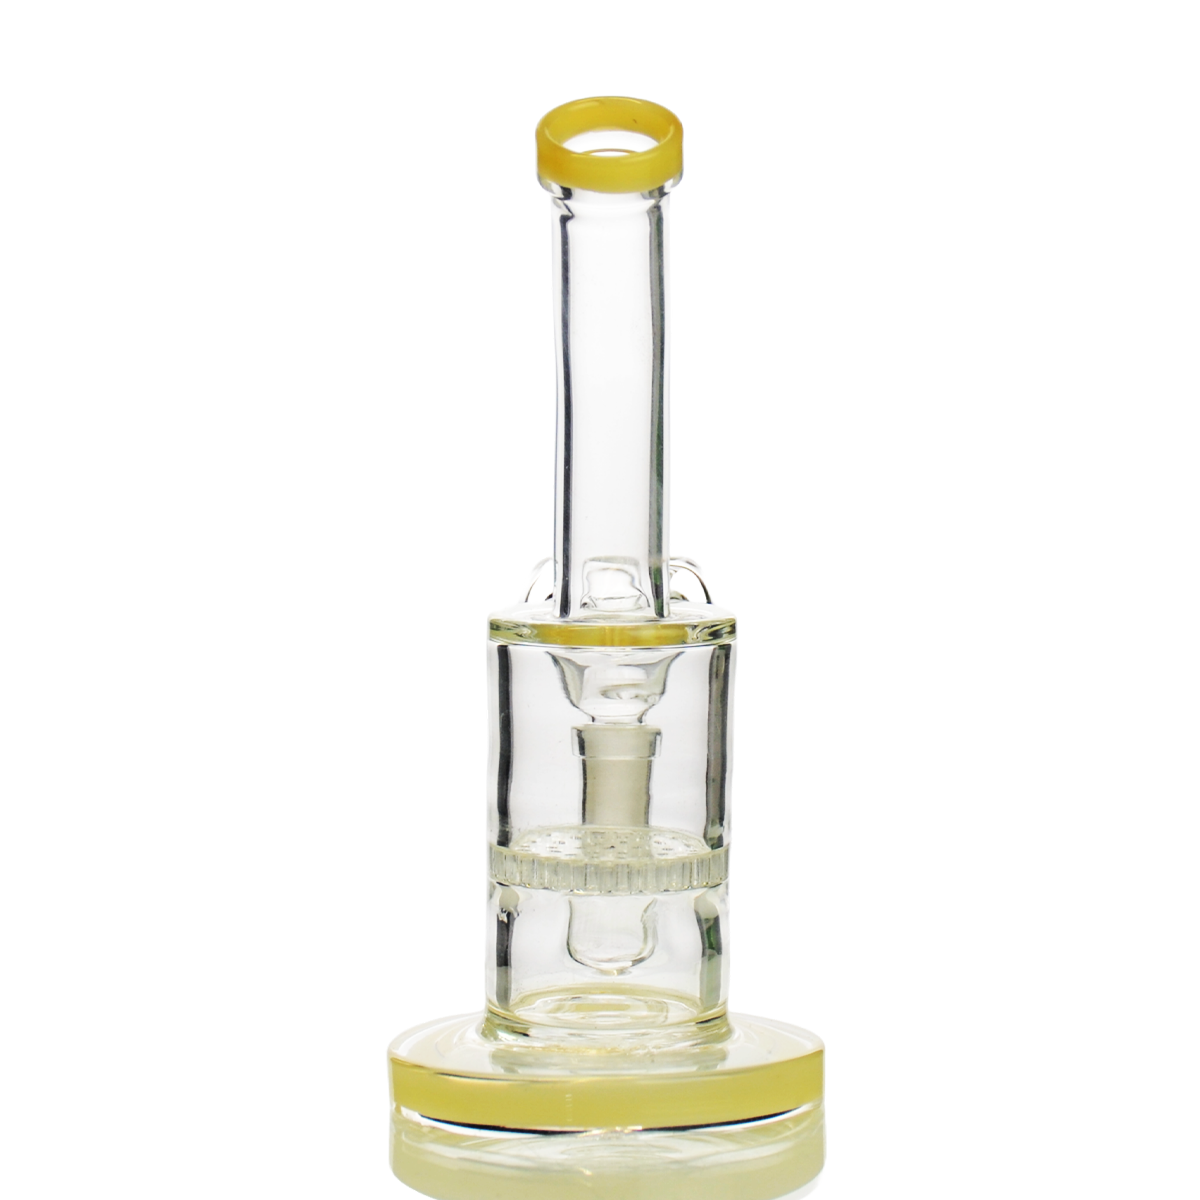 6" Honeycomb Bong with 14mm Male Bowl Included